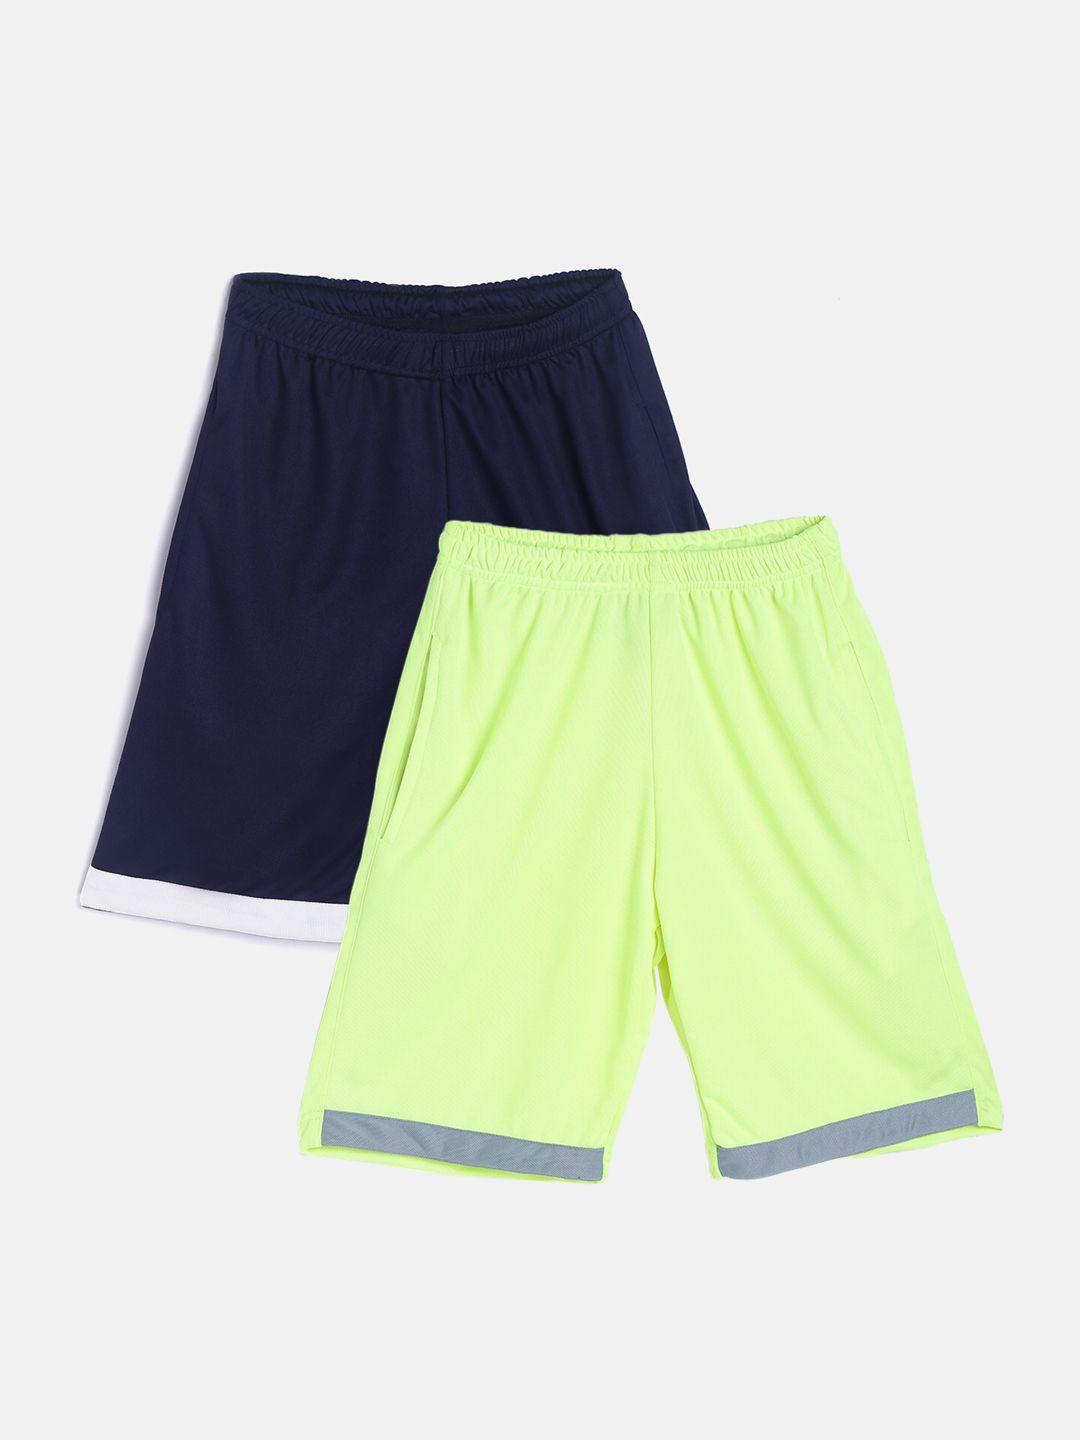 tiny hug boys pack of 2 fluorescent green high-rise outdoor sports shorts